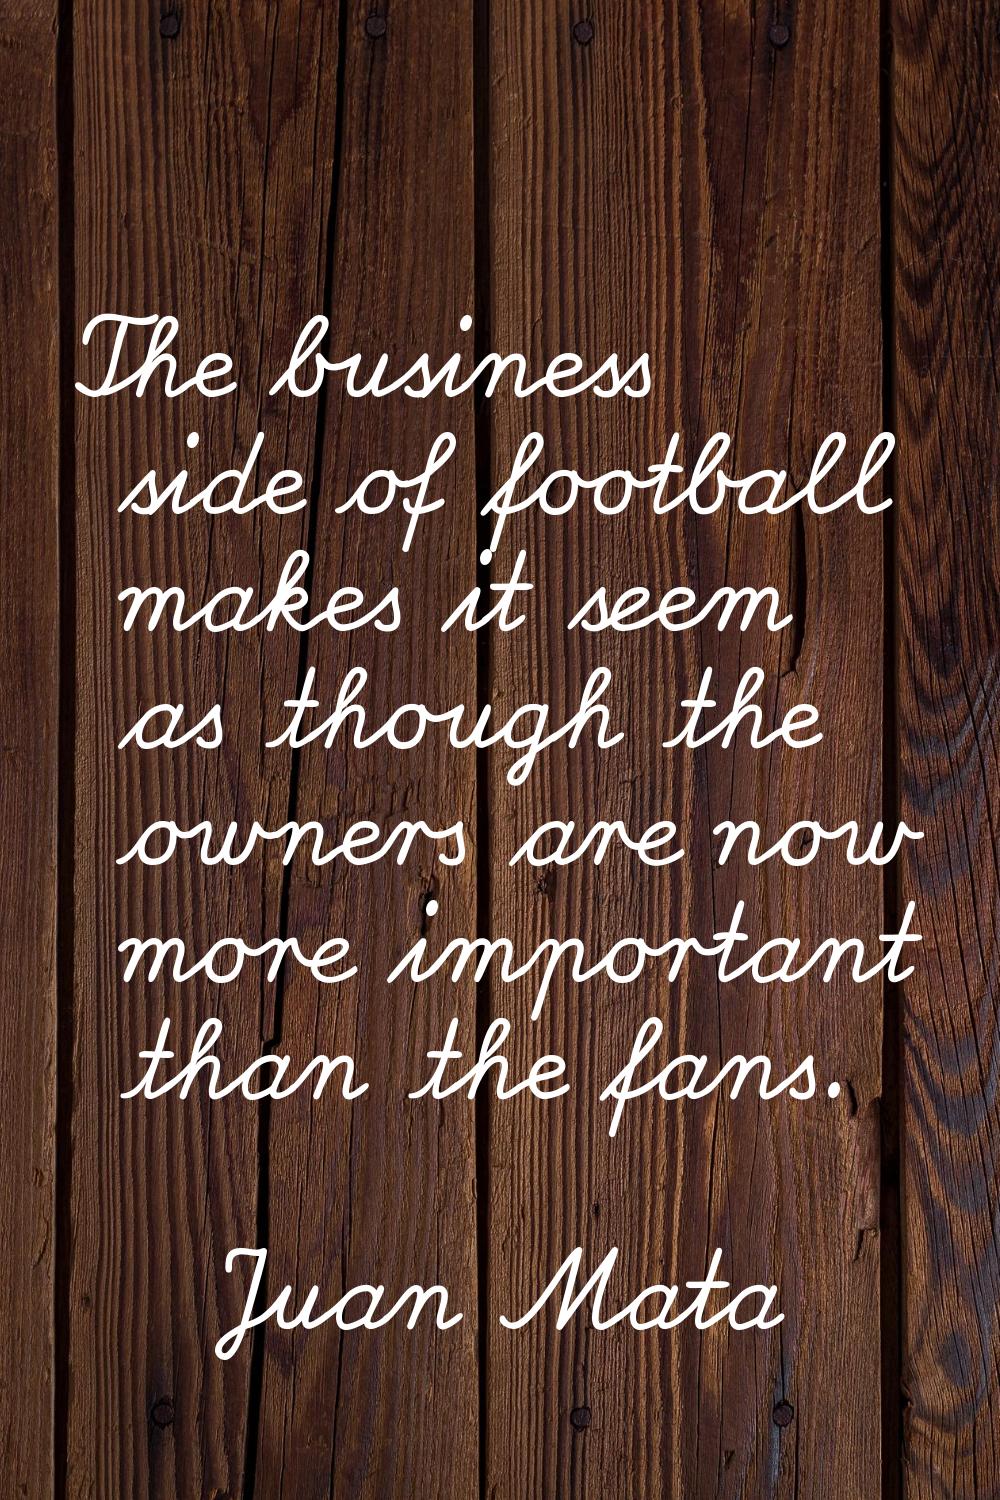 The business side of football makes it seem as though the owners are now more important than the fa